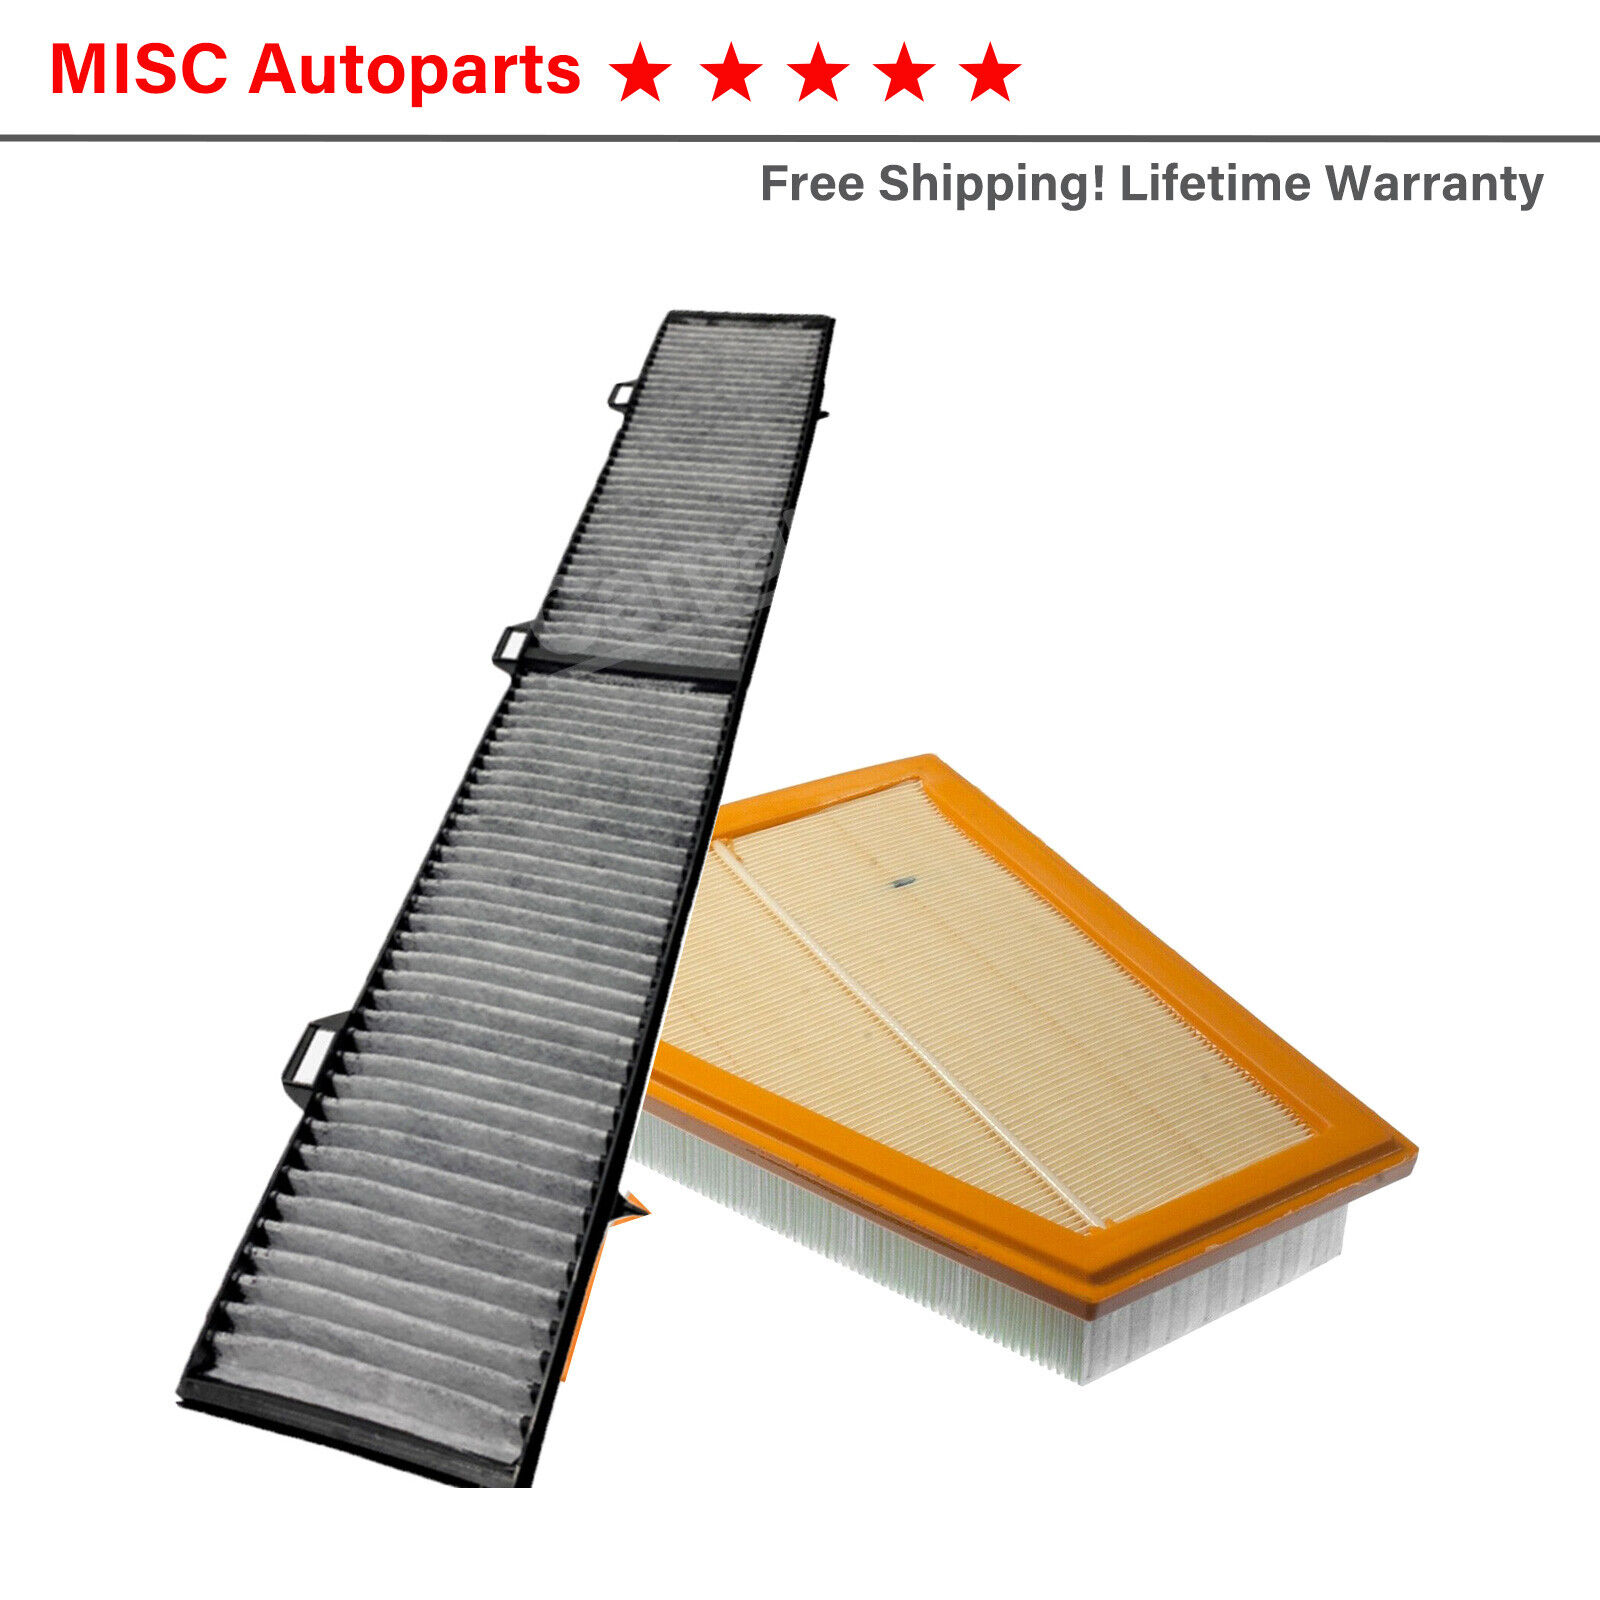 Engine & Cabin Air Filter for 2012-2015 BMW X1 L4 2.0L